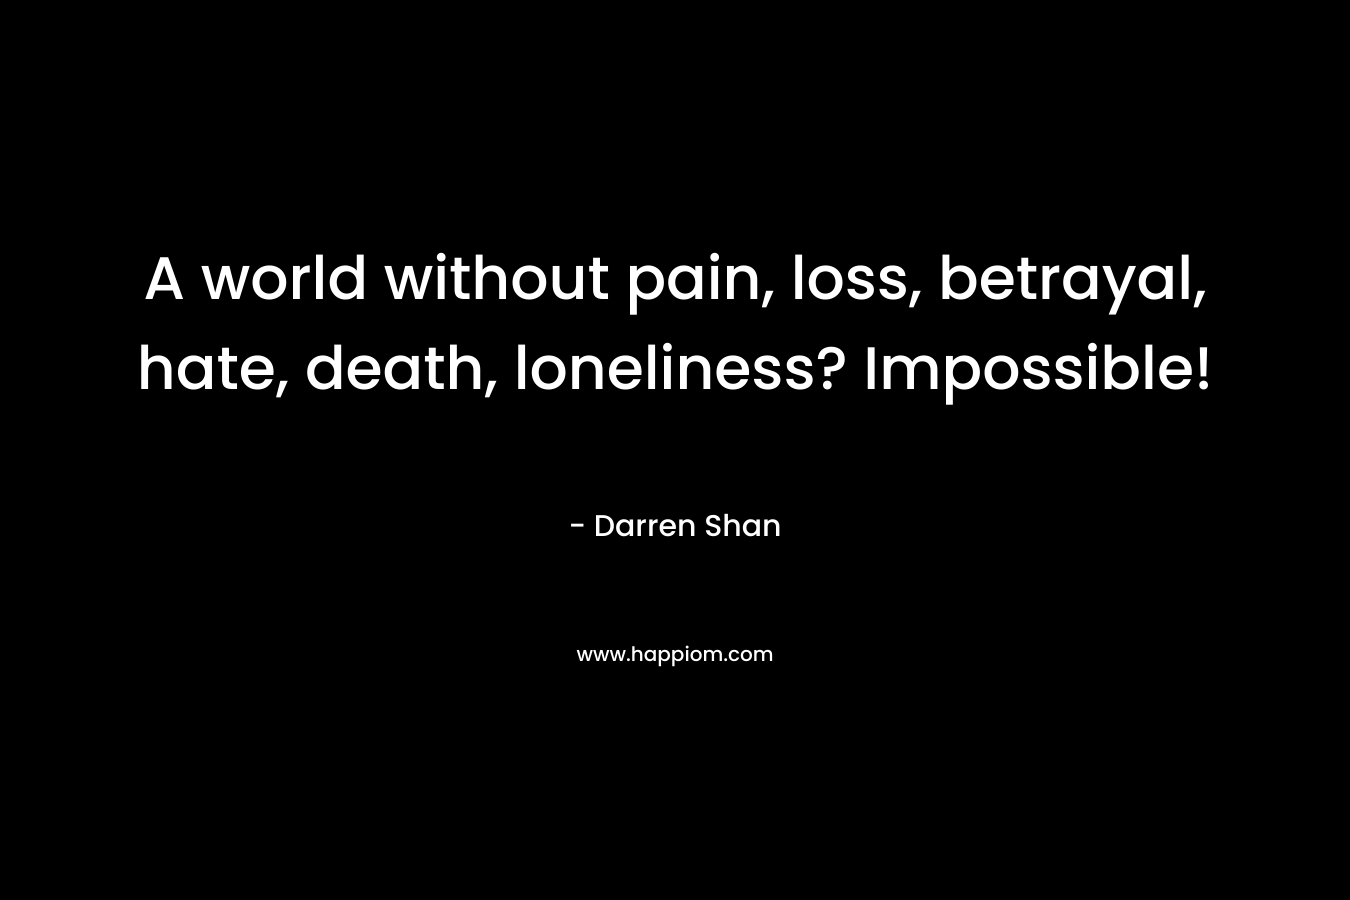 A world without pain, loss, betrayal, hate, death, loneliness? Impossible! – Darren Shan